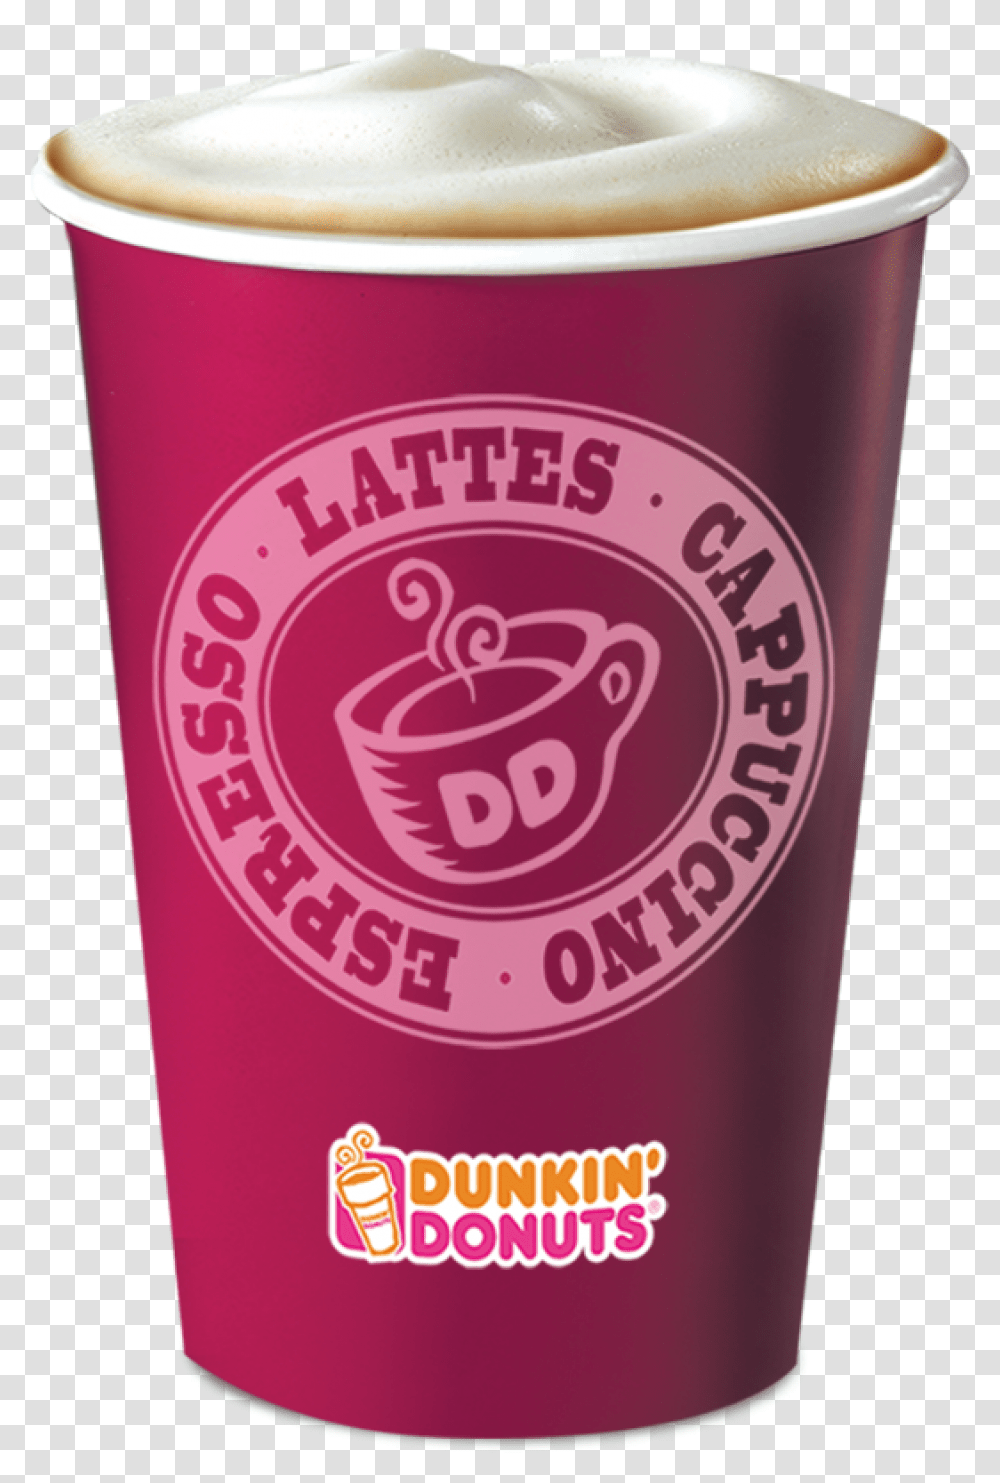 Dunkin Donuts, Bottle, Cosmetics, Beer, Alcohol Transparent Png